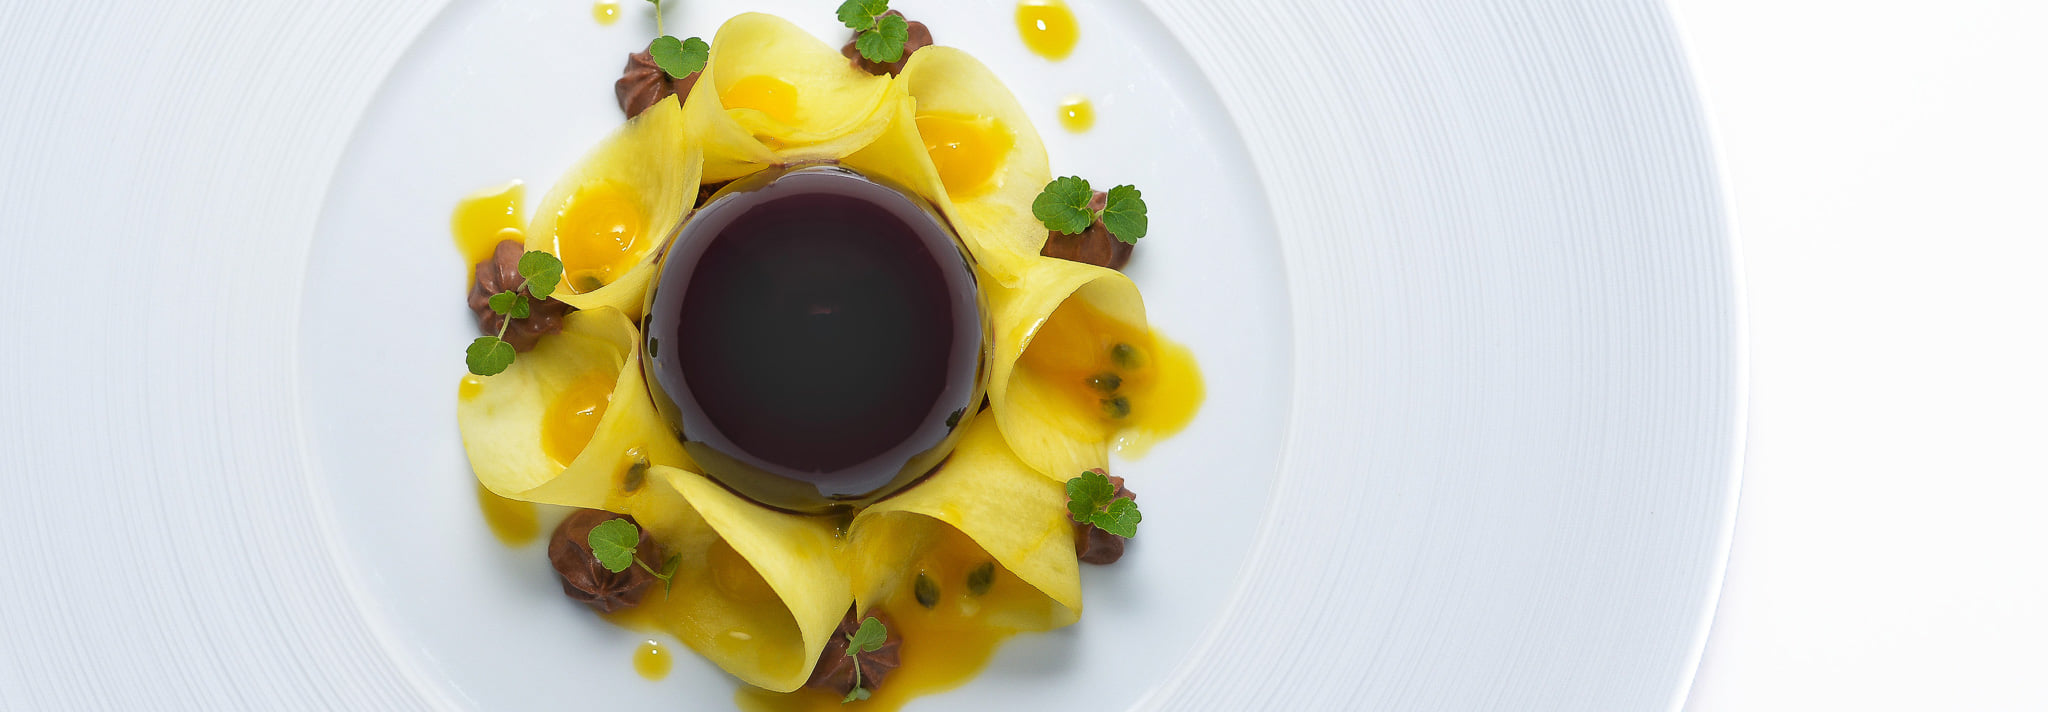 A gourmet and exotic-style dessert at gastronomic restaurant Le Cèdre de Montcaud, in the shape of a sunflower